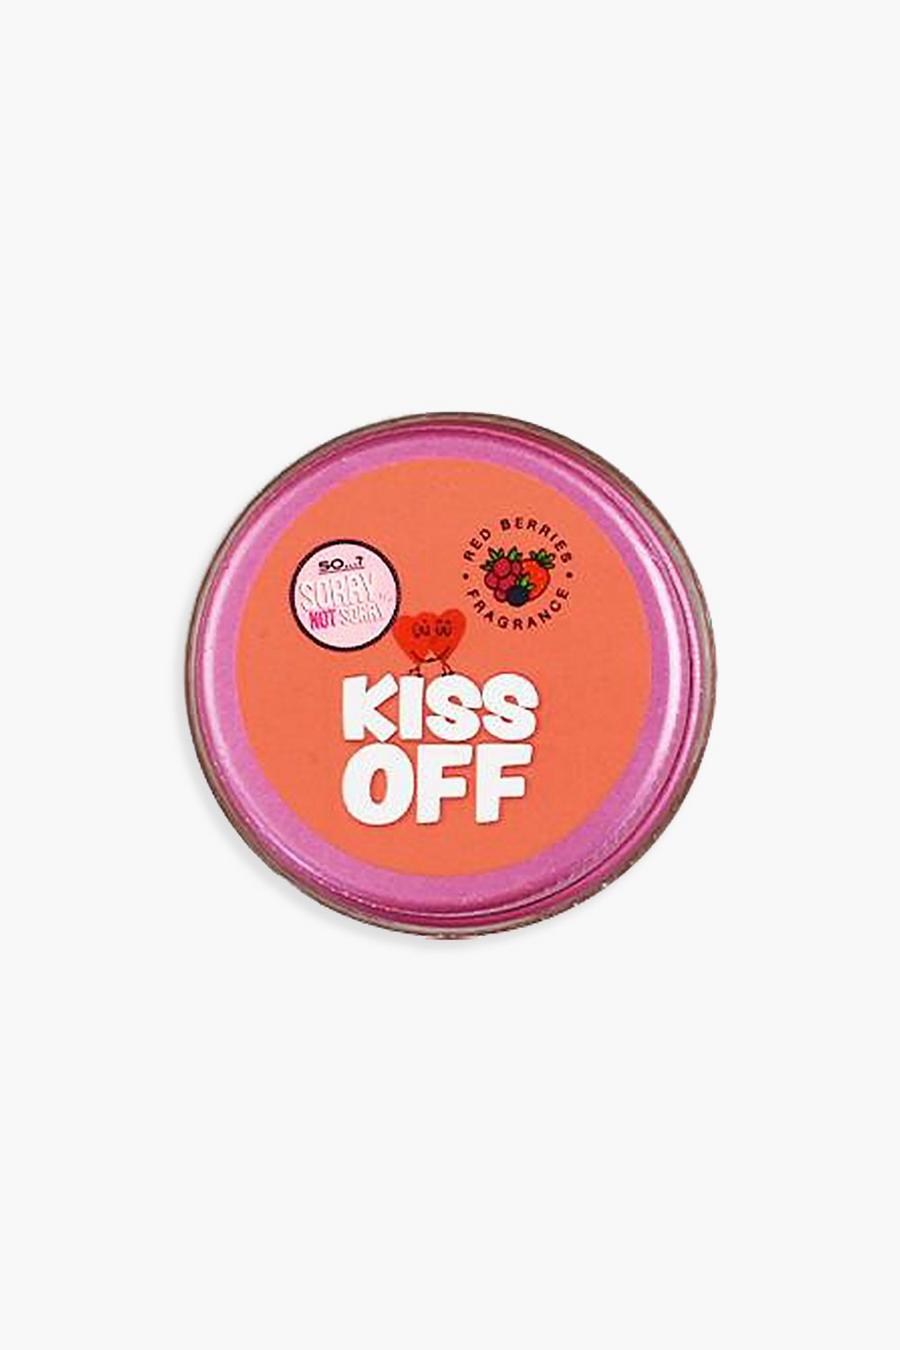 So.? Sorry Not Sorry Kiss Off Pout Balm, Baby pink